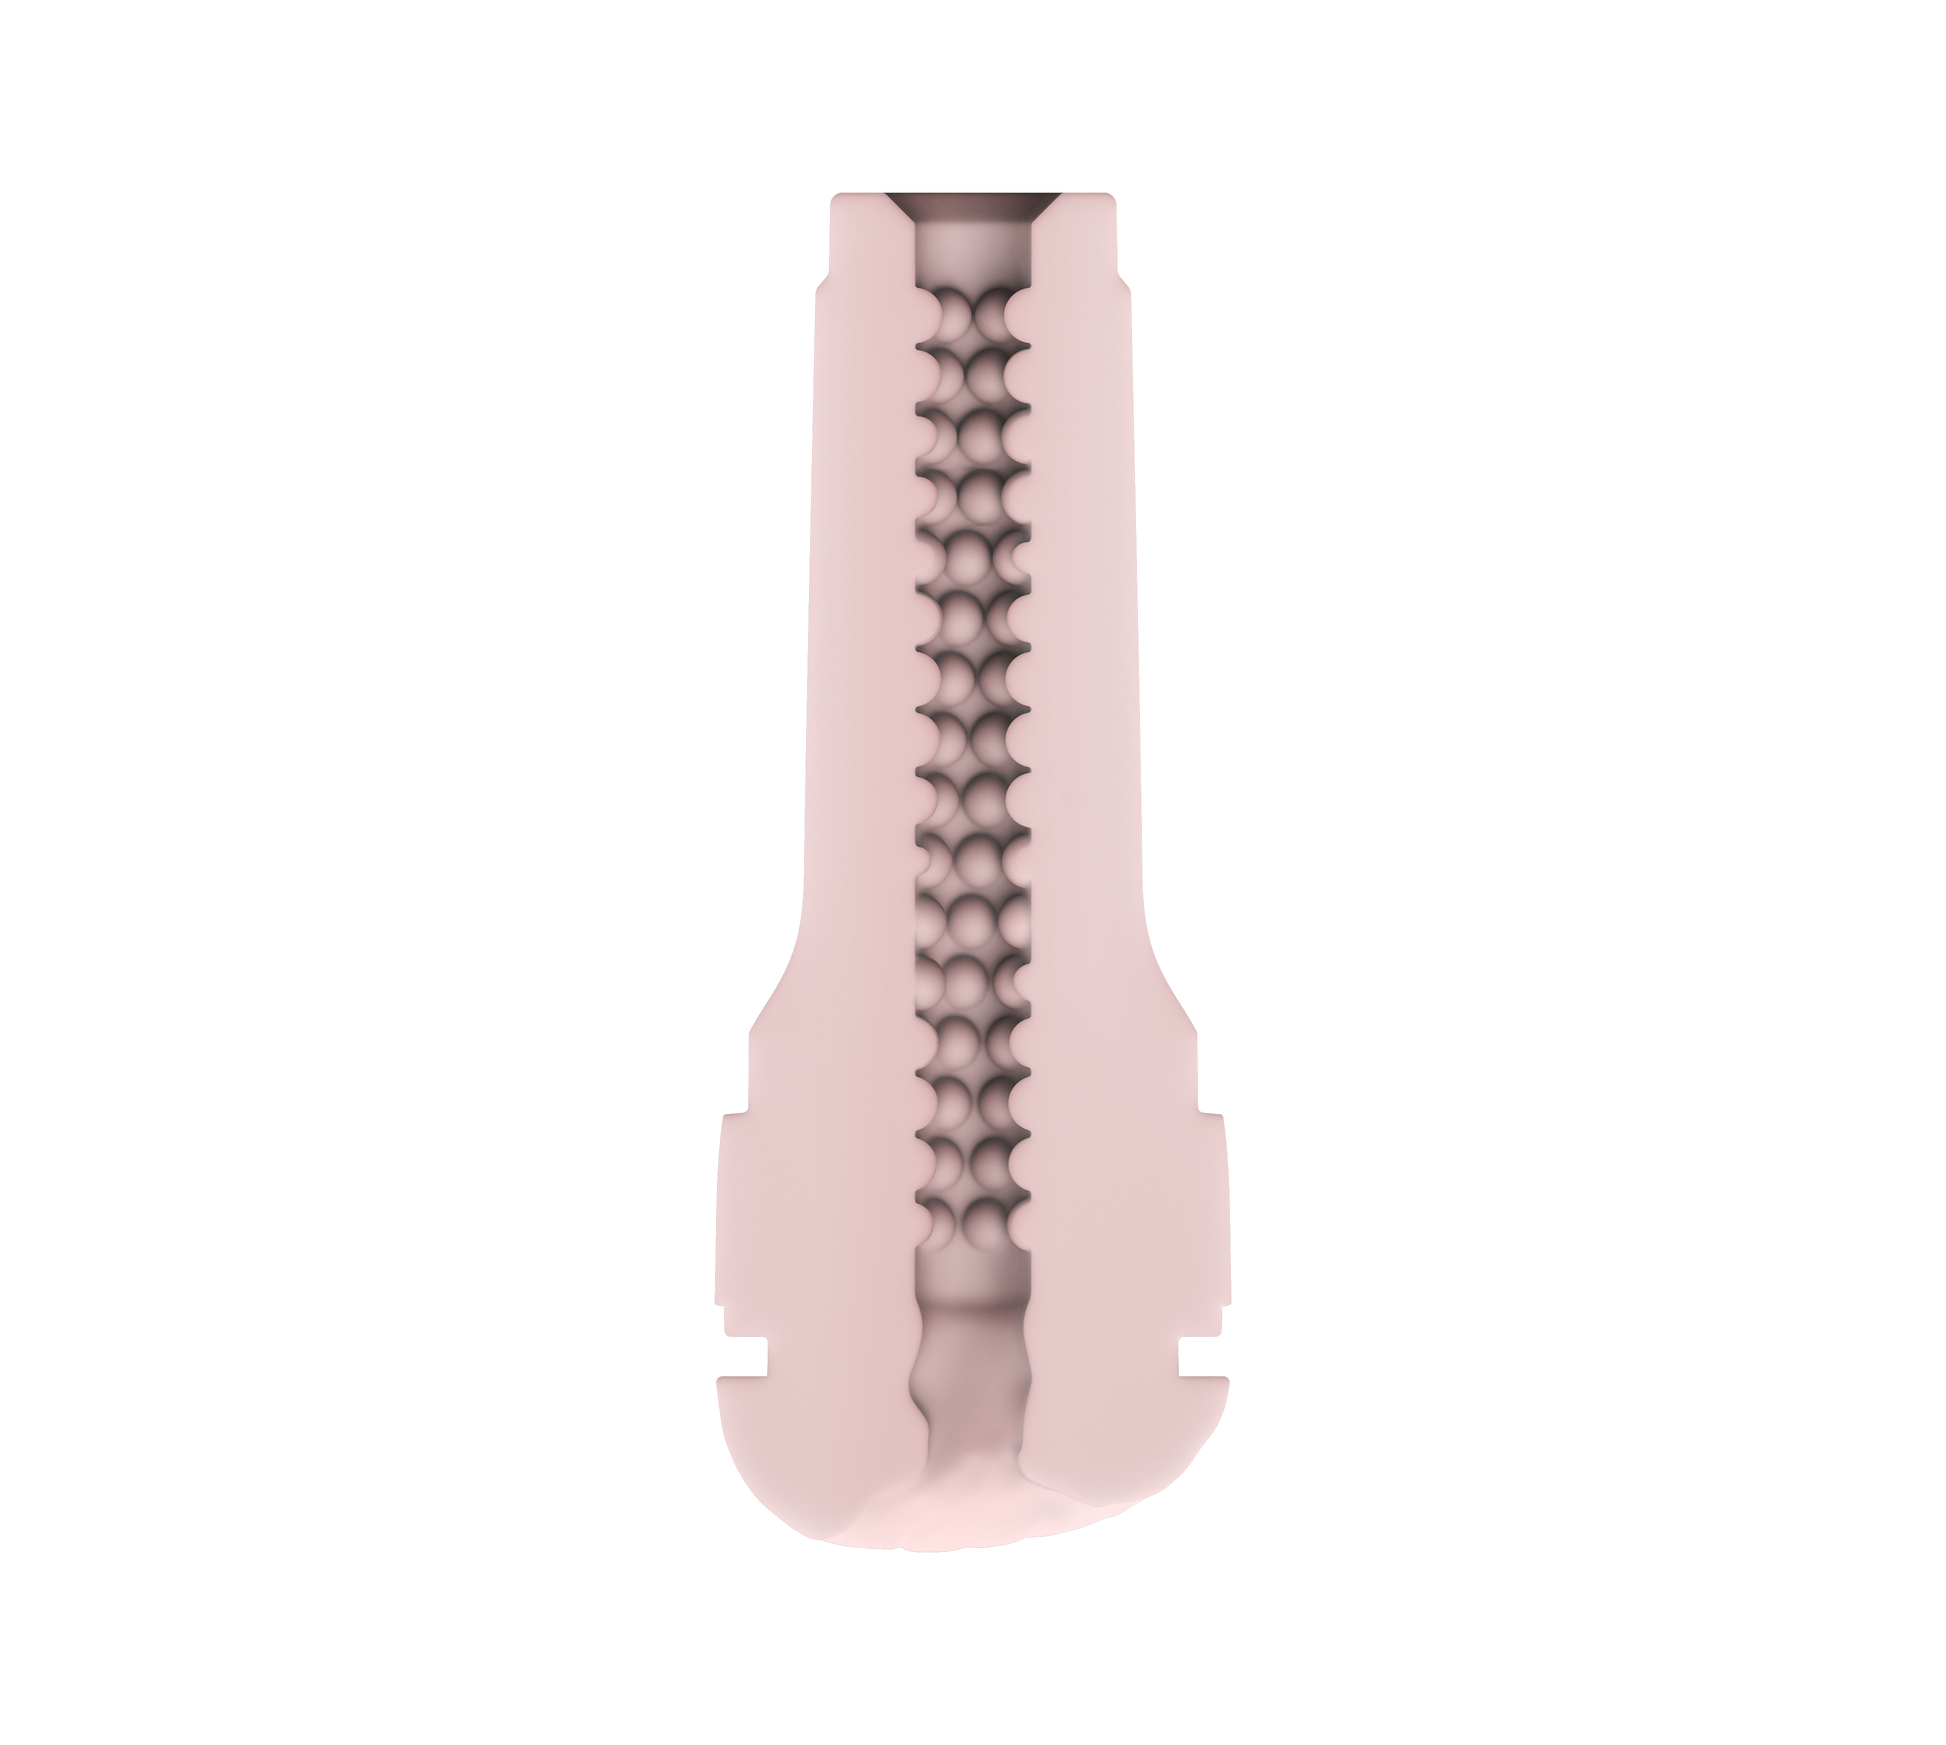 Cross-section view of the internal texture of the RealFeel stroker included with the KIIROO KEON. You can view all of the bumpy nodules that are uniform throughout the entirety of the sleeve | Kinkly Shop